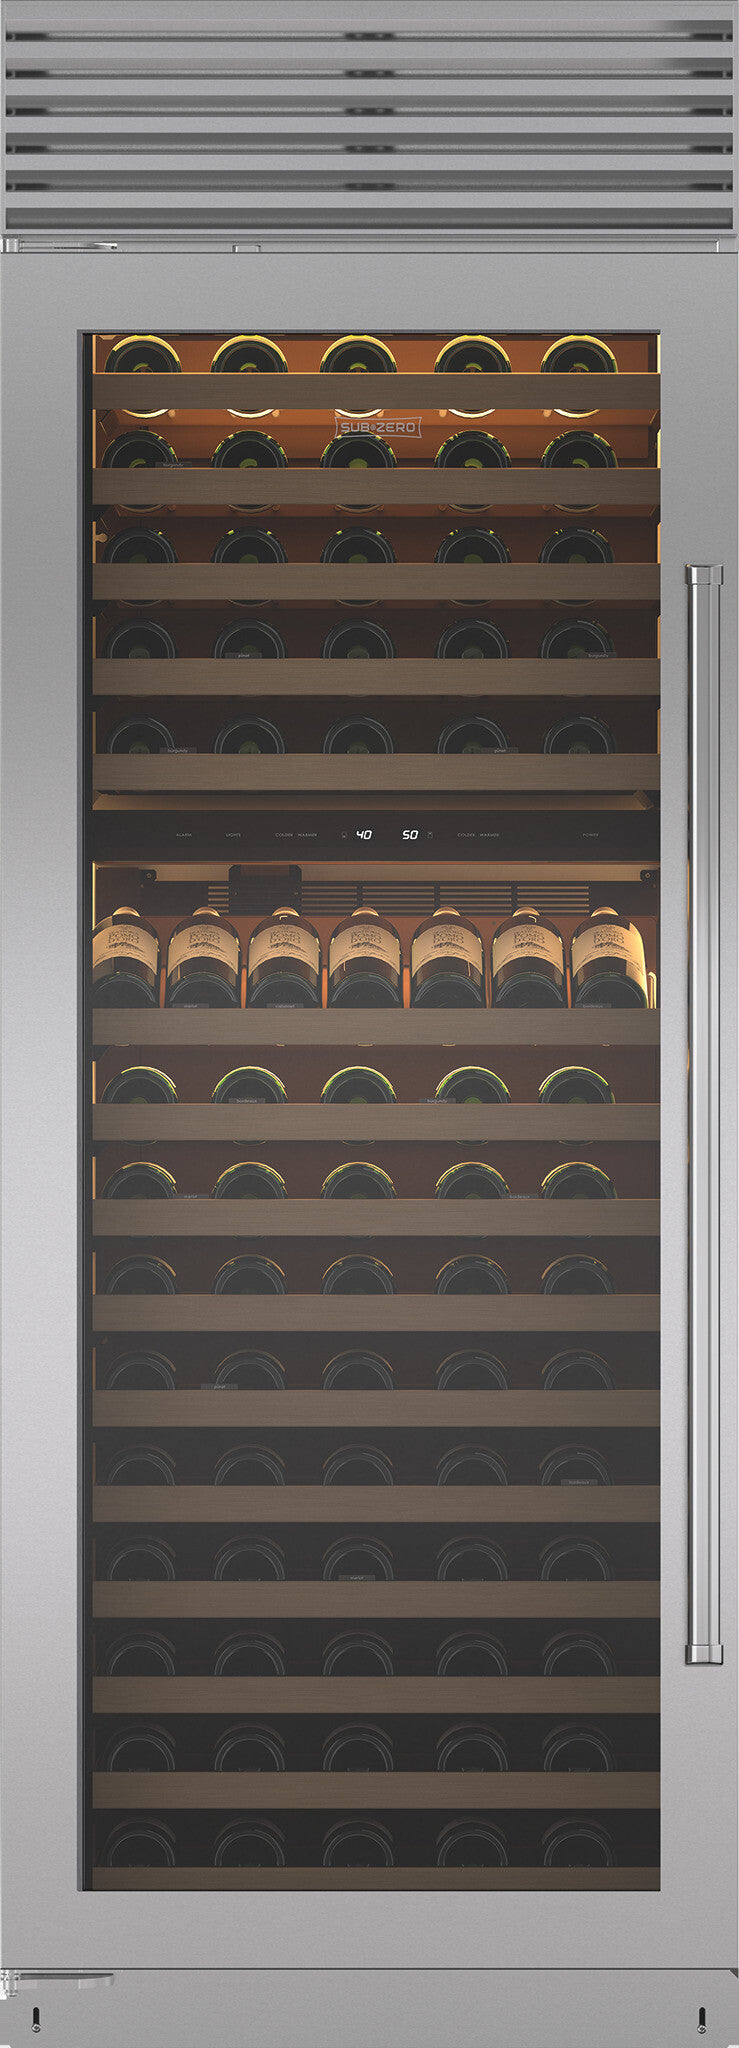 Sub-Zero - 30 Inch 146 Bottle Built In / Integrated Wine Fridge Refrigerator in Stainless - CL3050W/S/P/L